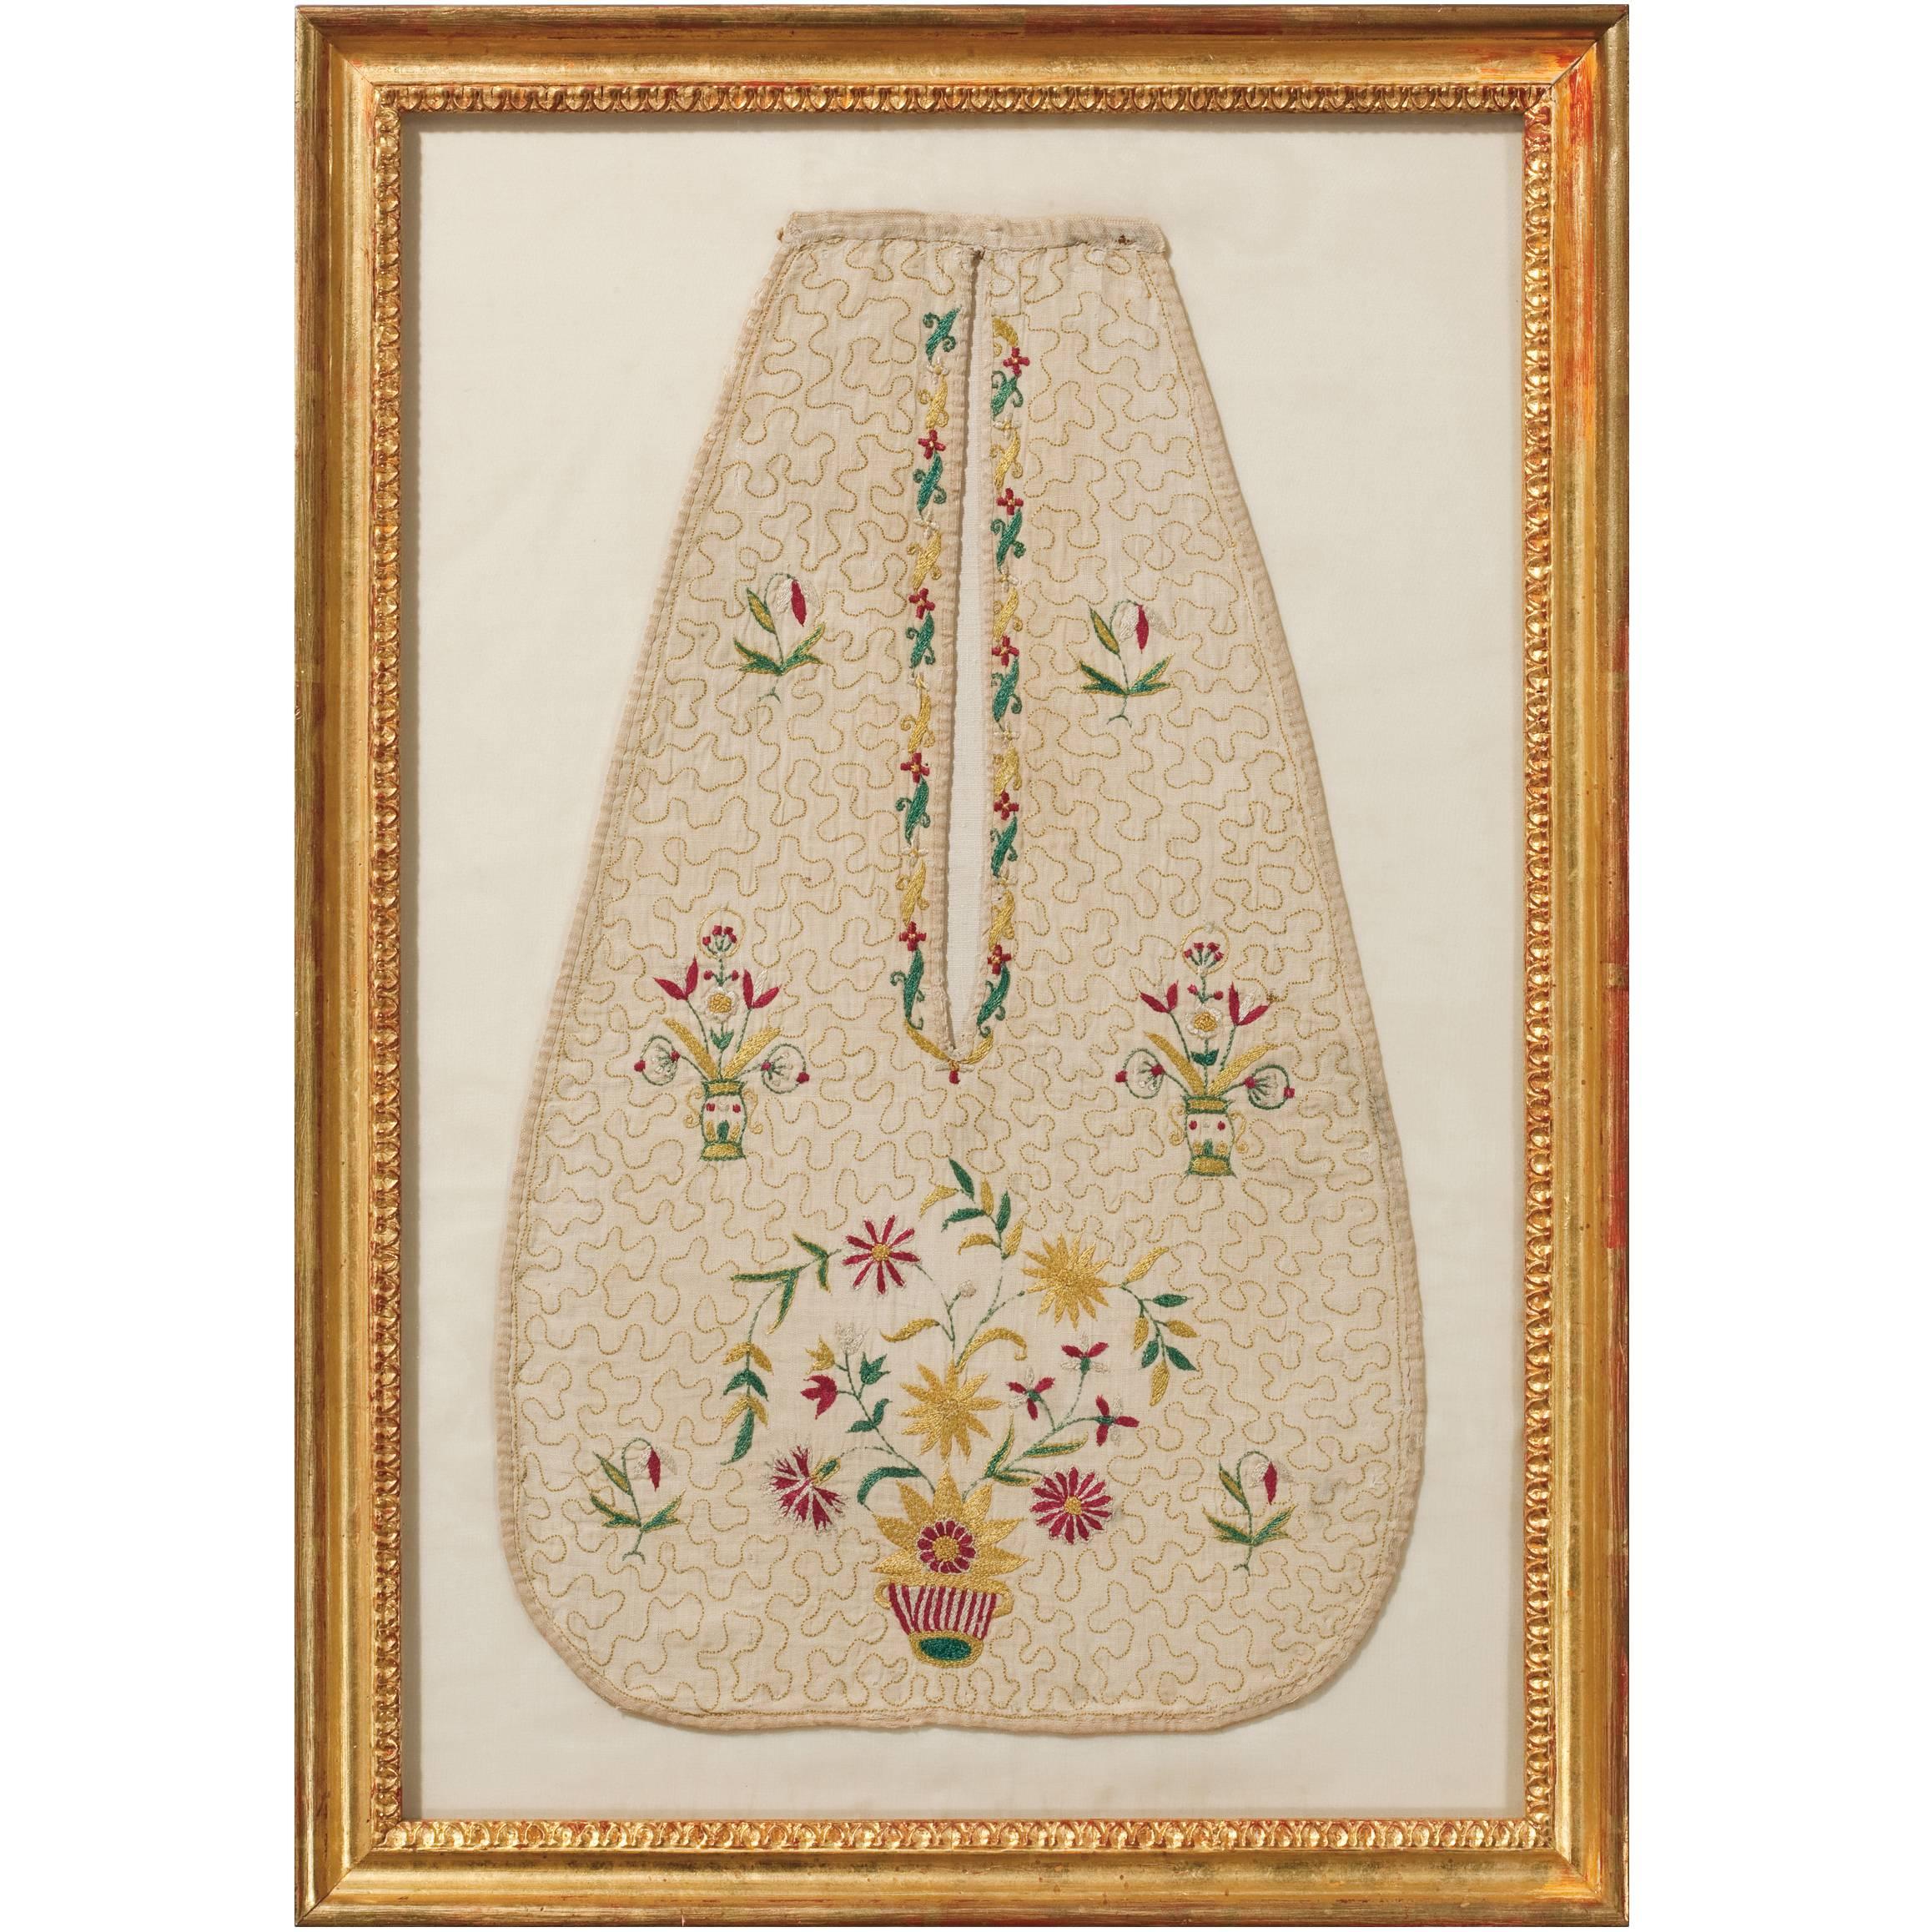 Rare Early 18th Century Embroidered Lady's Pocket